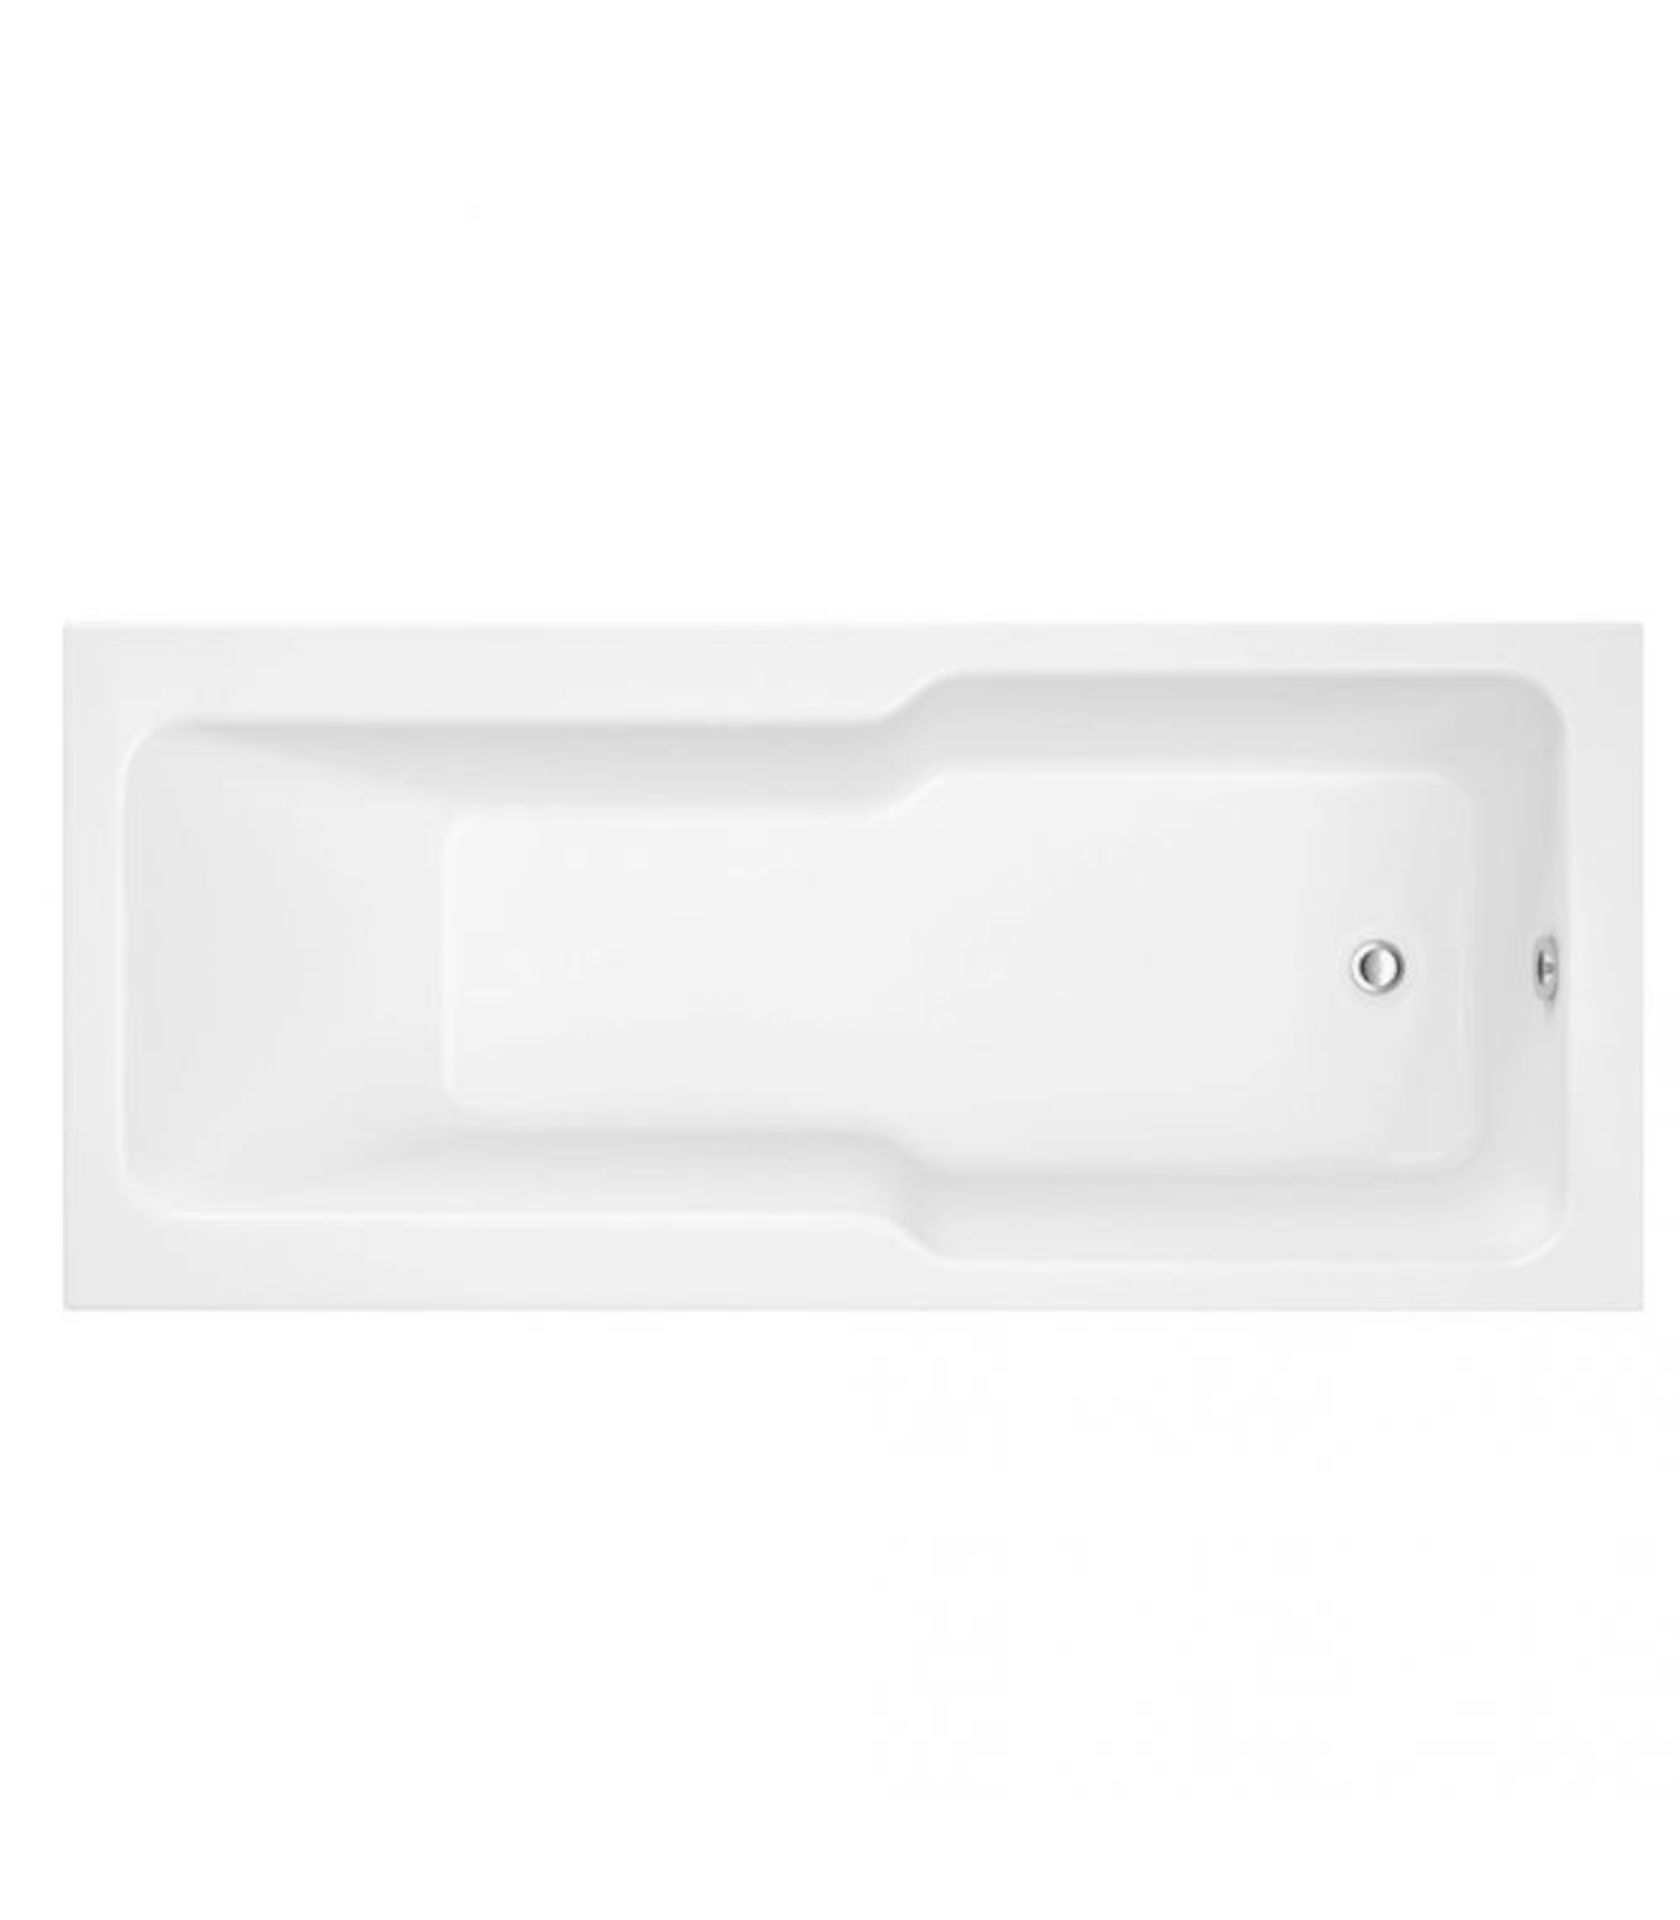 New (H5) Synergy Evolve 1700 x 750mm Premier Shower Bath. RRP £520.00. Clean Structural Lines ...